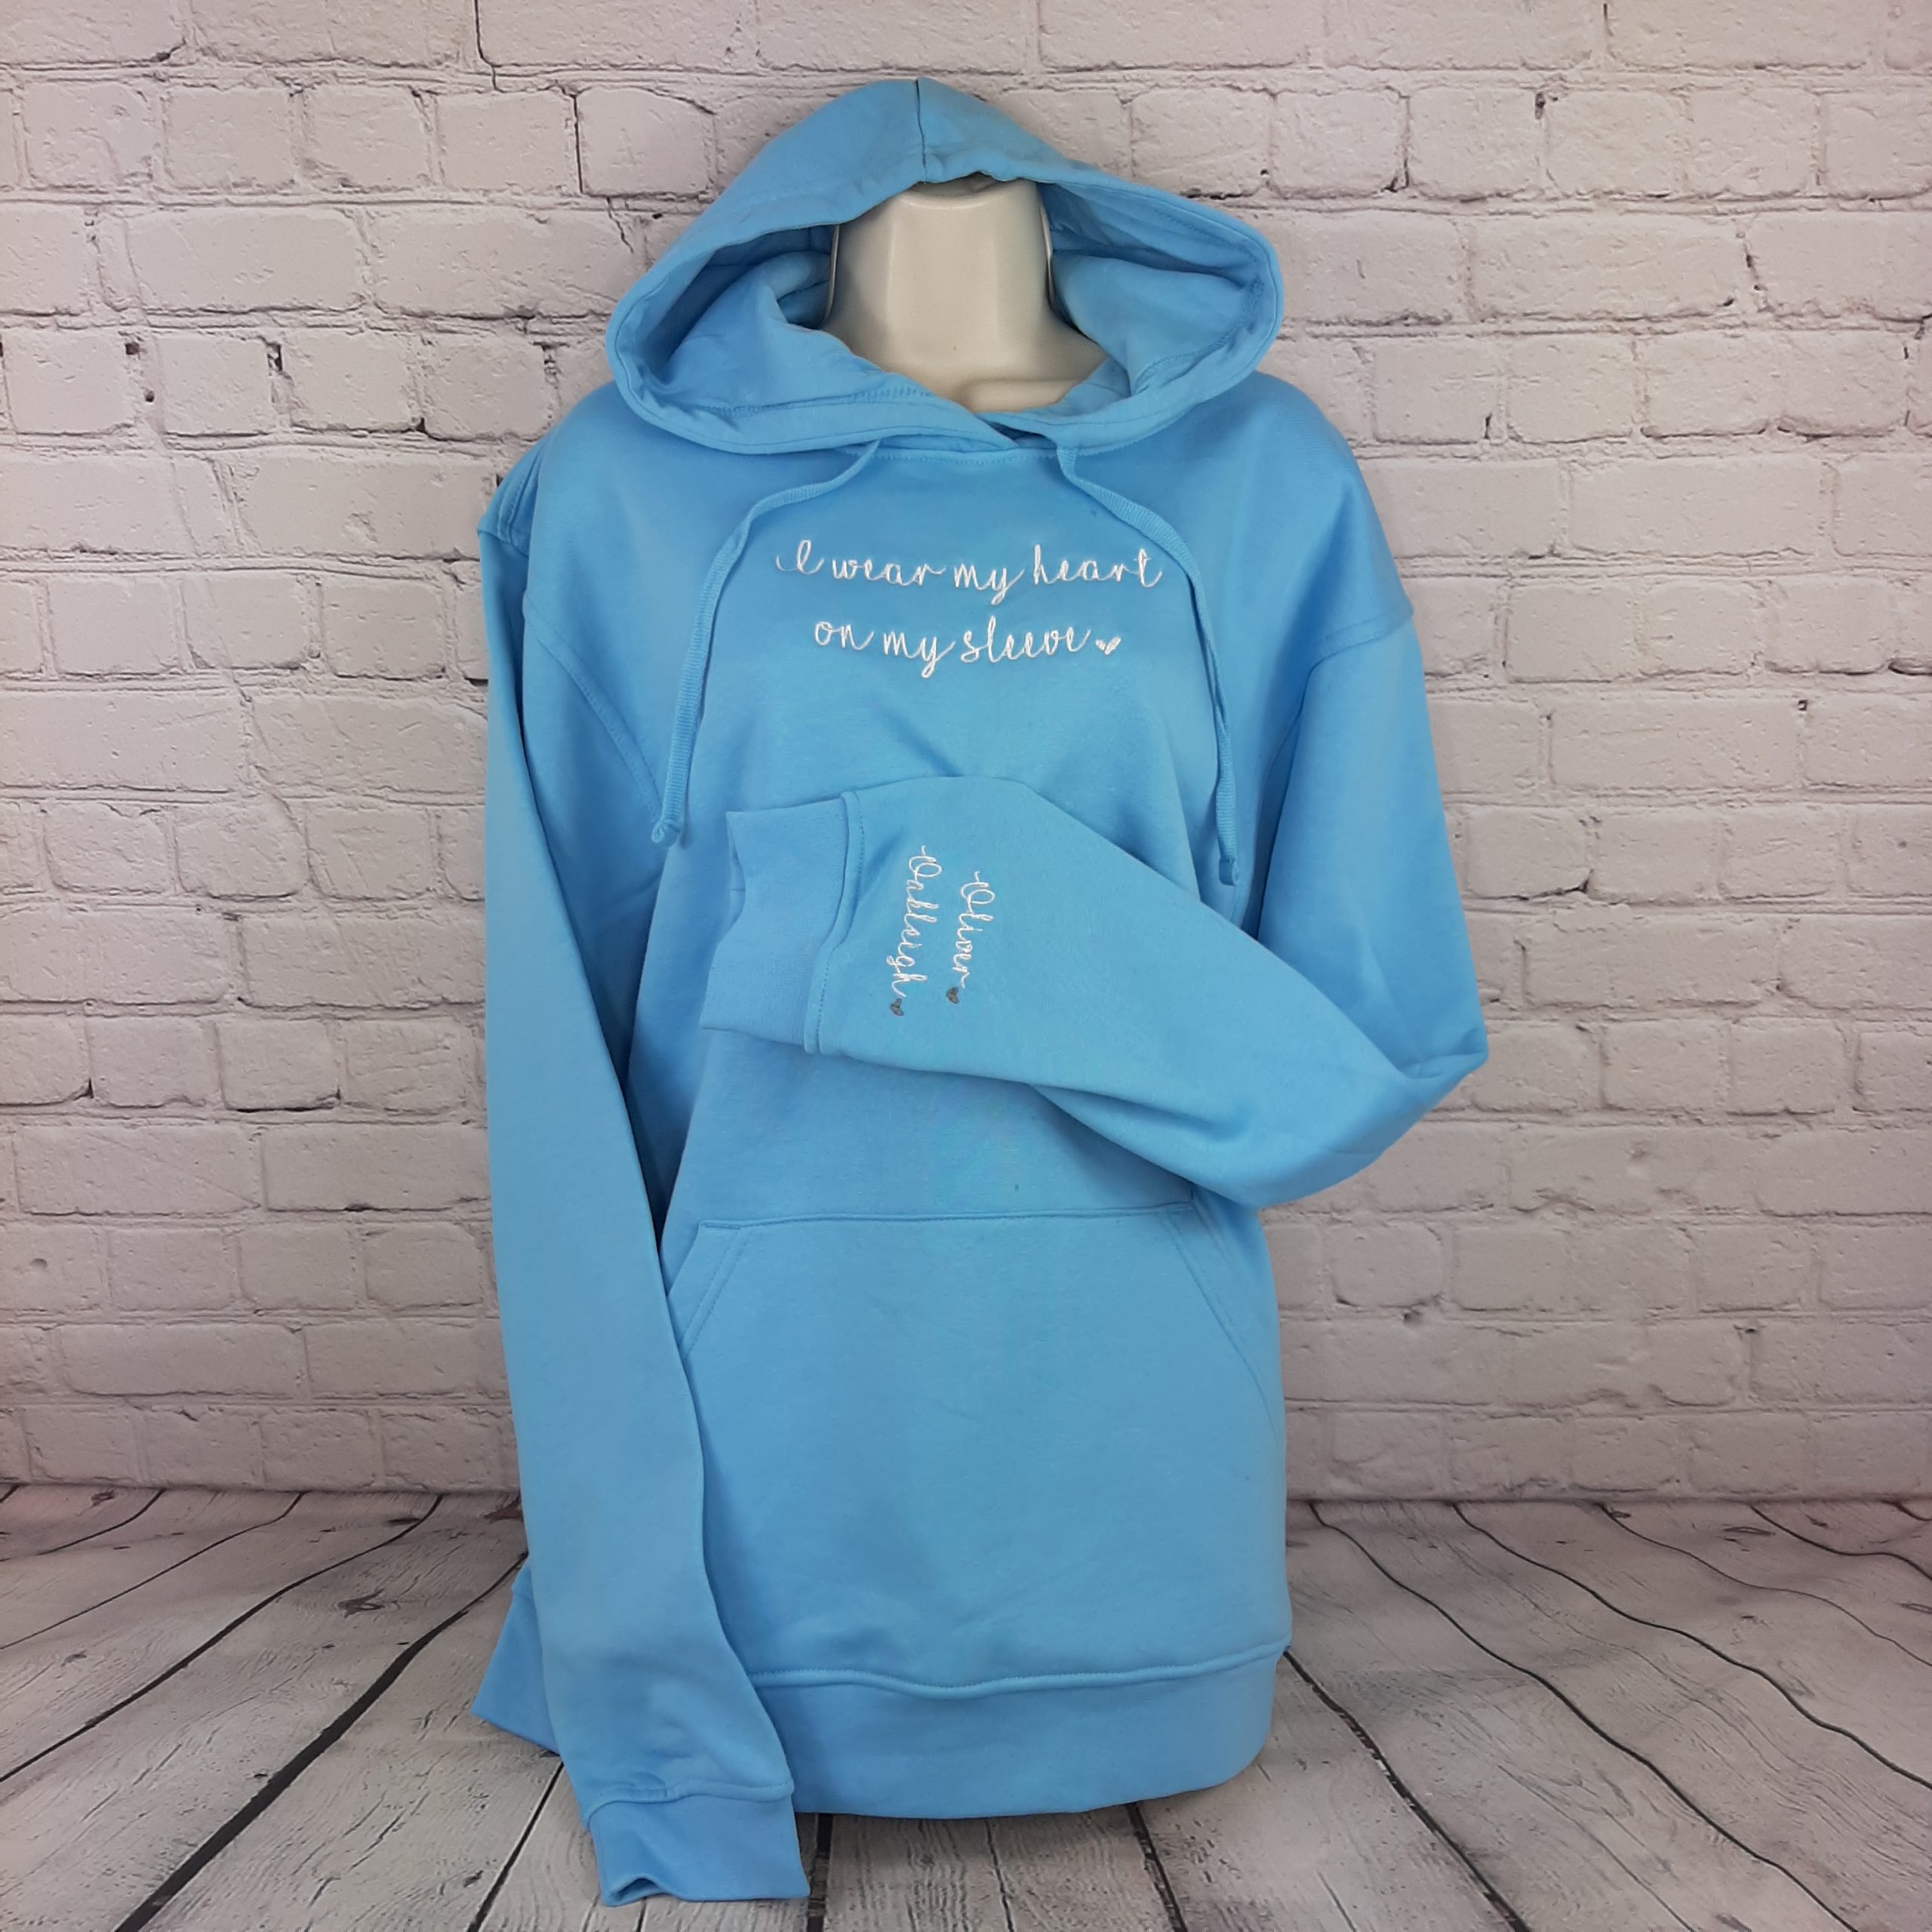 Heart on my Sleeve Hoodie, personalised mother day present of gift for mum gift for her, embroidered with names and hearts on sleeve. in blue script font, Gift for mum, gift for her